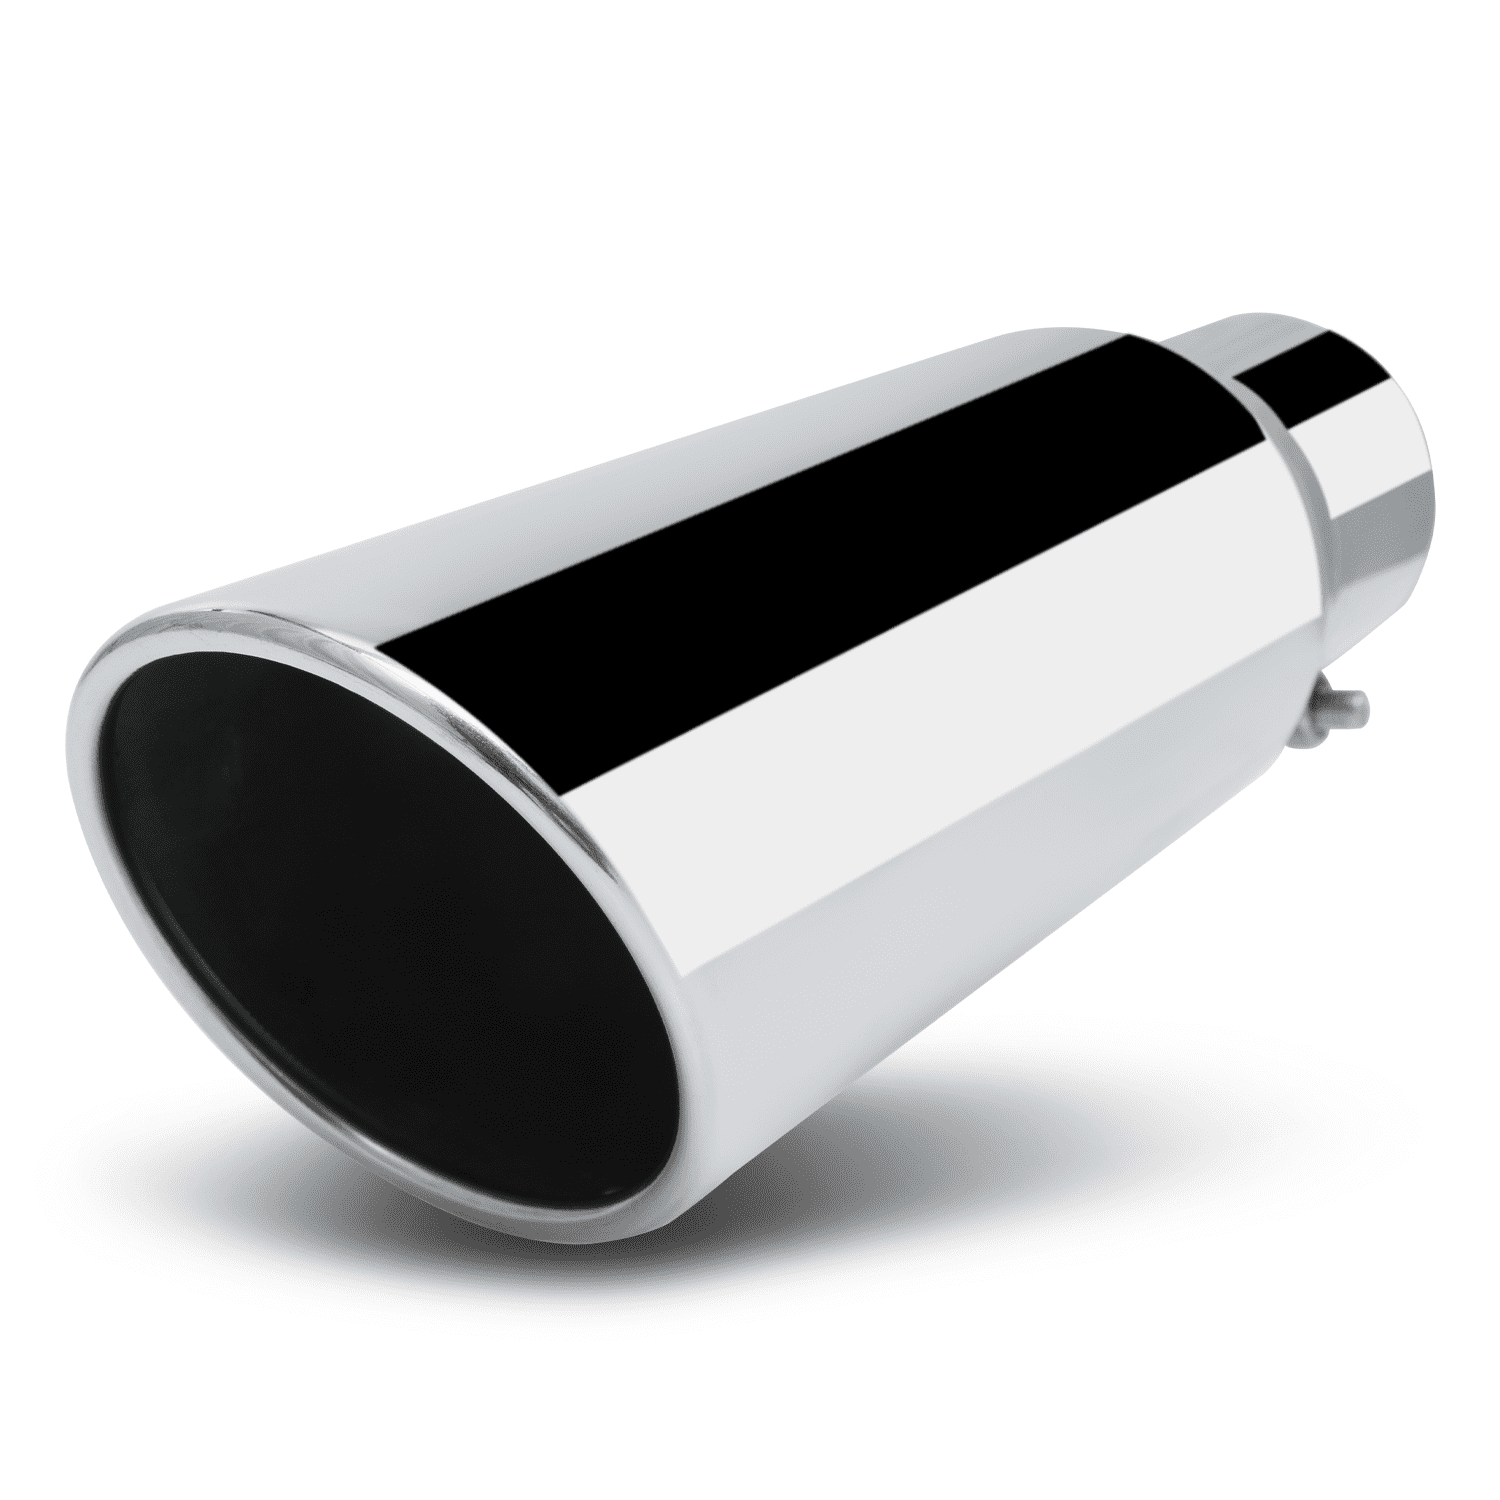 Universal Car Turbo Sound Whistle Muffler Auto Accessory With Exhaust Pipe  For Eco Friendly Whistling And 3D Design From Dhgatetop_company, $6.46